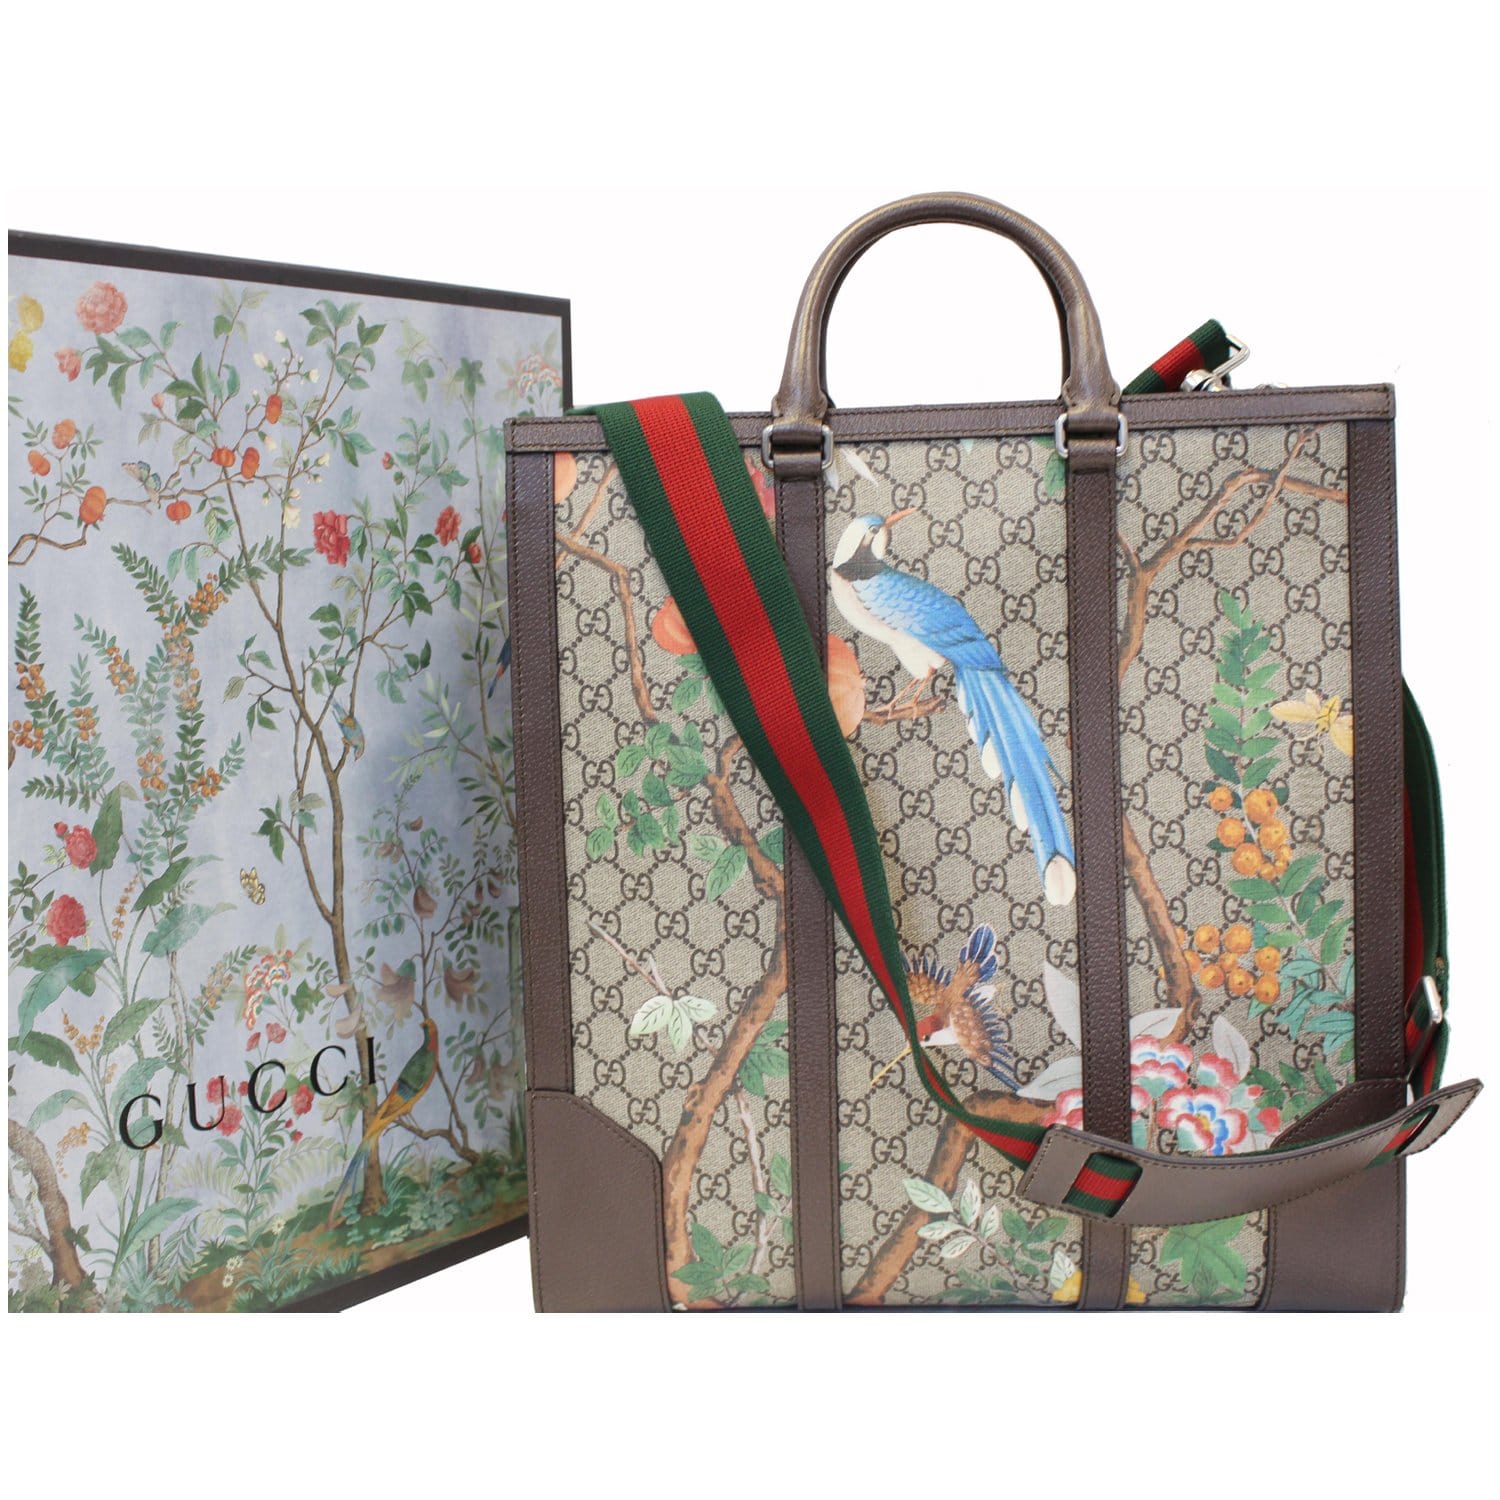 Gucci Convertible Tote Monogram GG Tian Print Brown/Beige/Green/Red - US